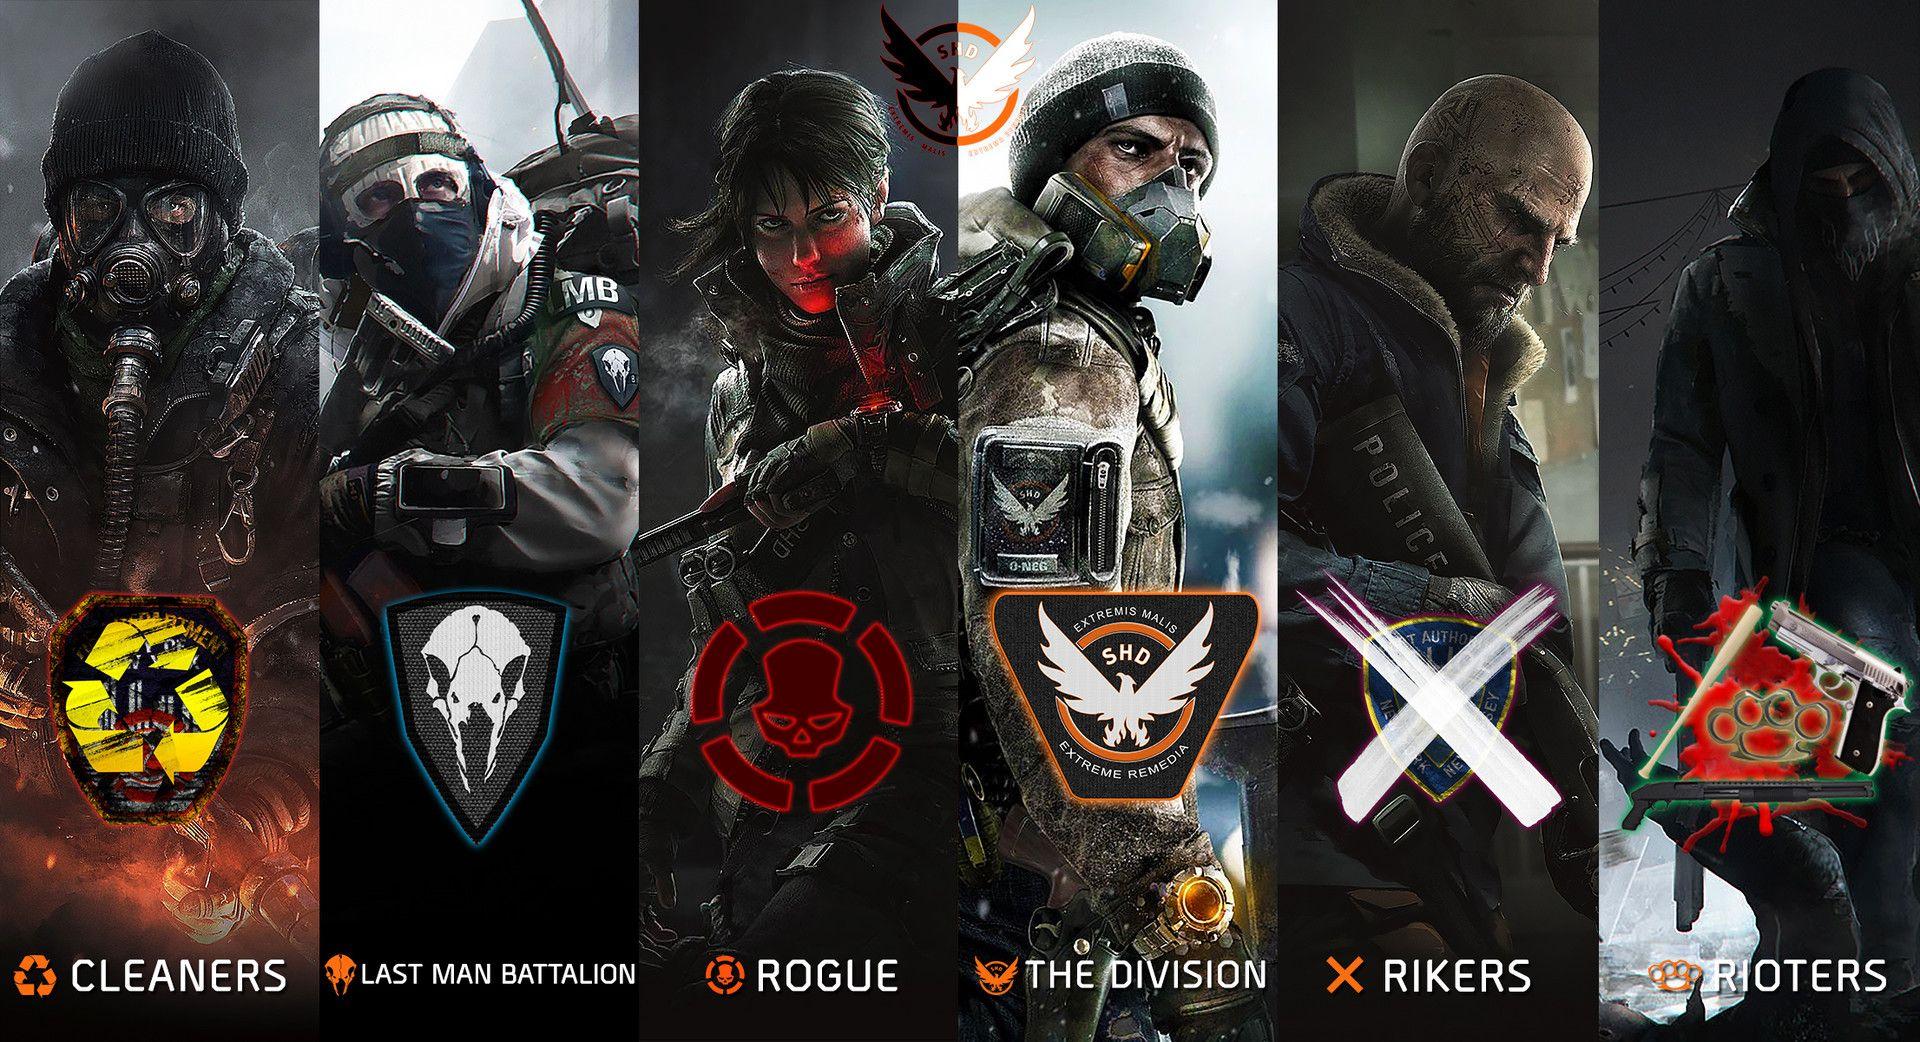 The Division Faction Logo - The Division Factions, Black Beast